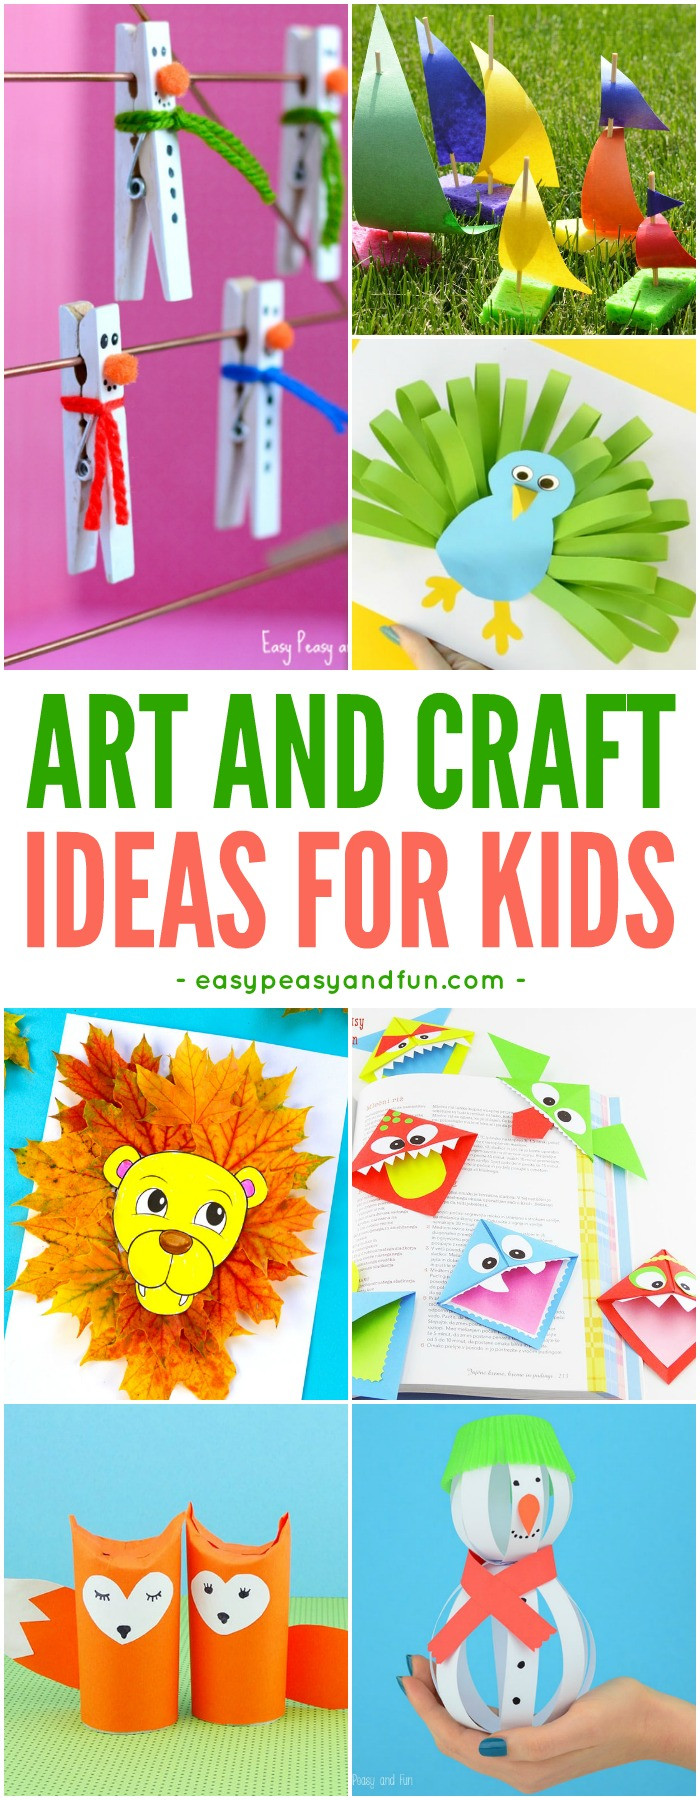 Arts And Crafts For Toddlers
 Crafts For Kids Tons of Art and Craft Ideas for Kids to